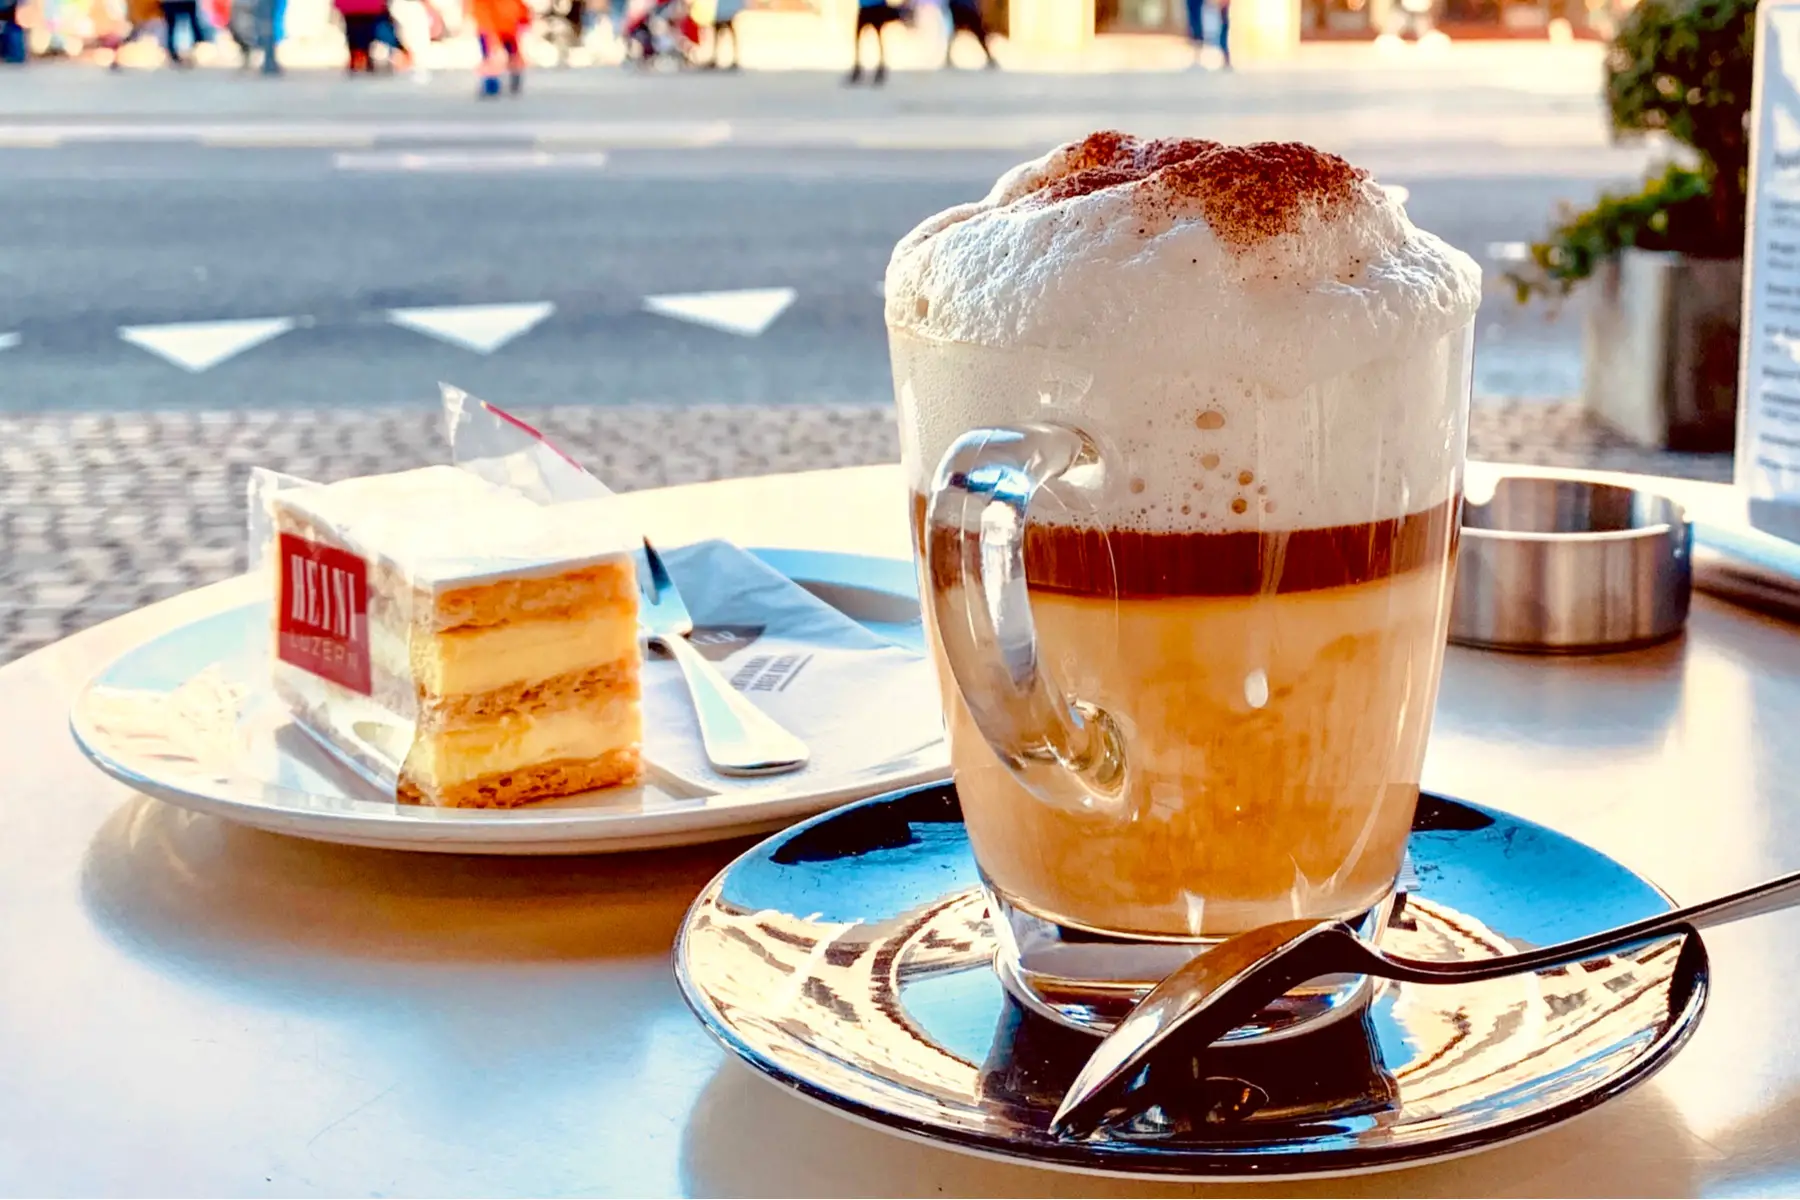 Coffee and cake on an outdoor terrace